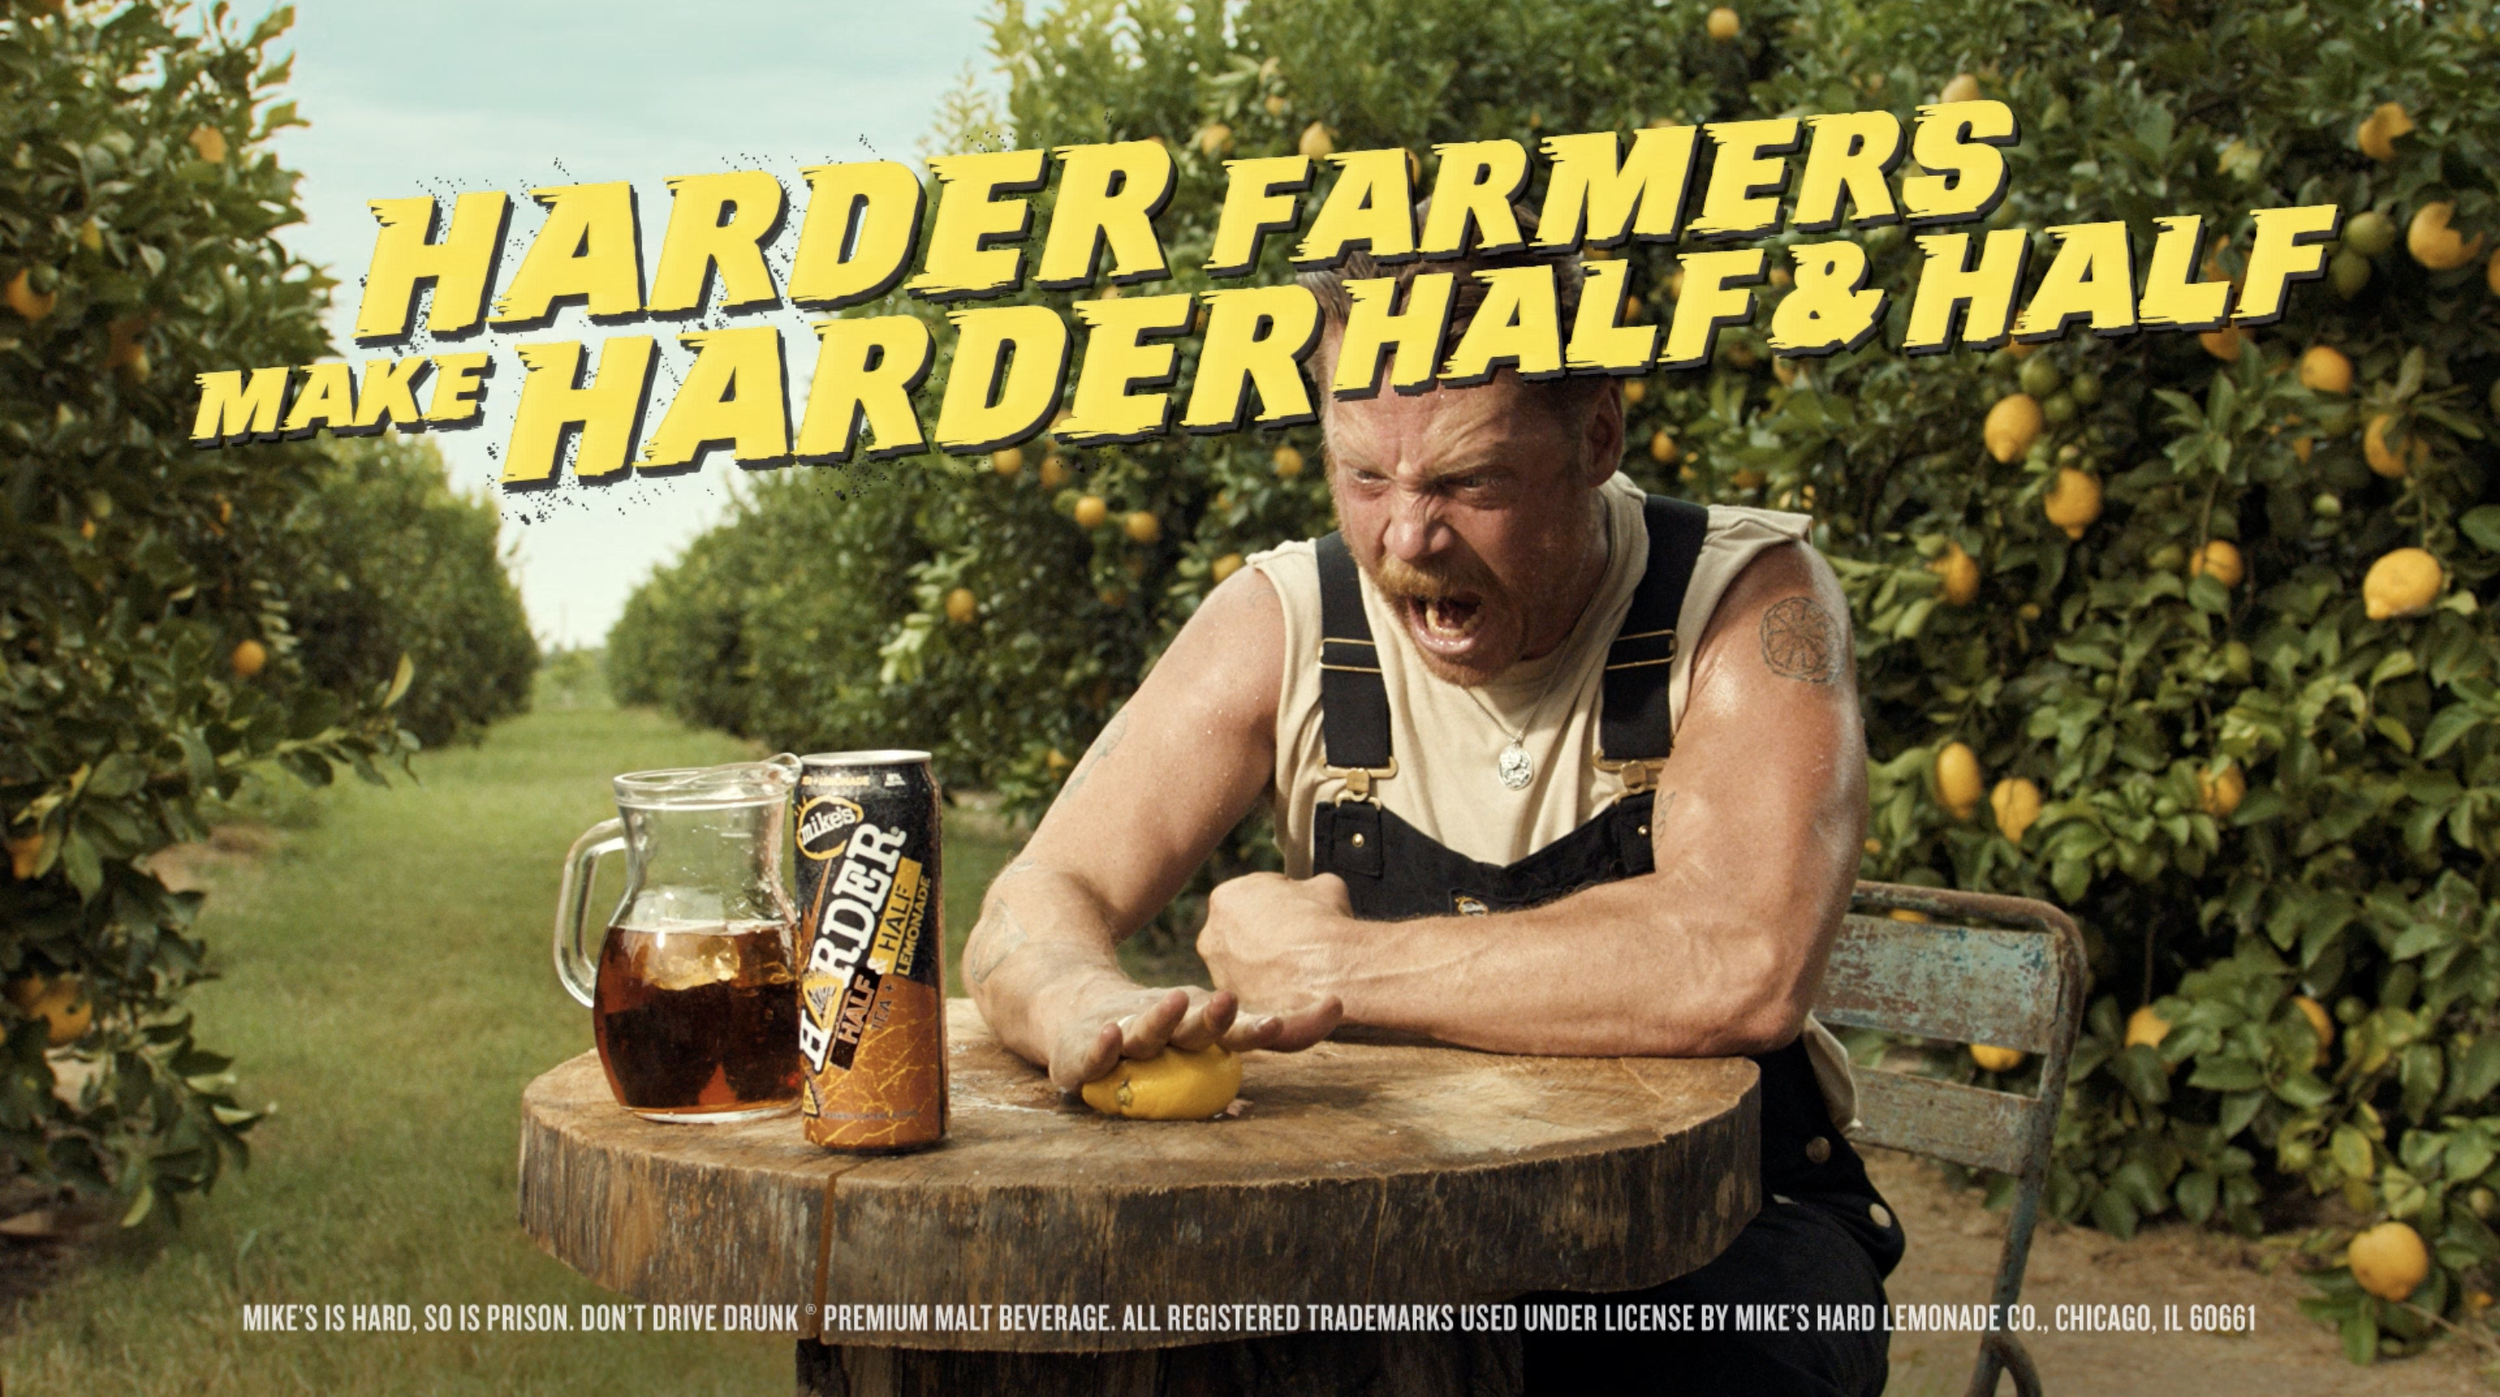 THE HARDER FARMER - MIKE'S HARDER